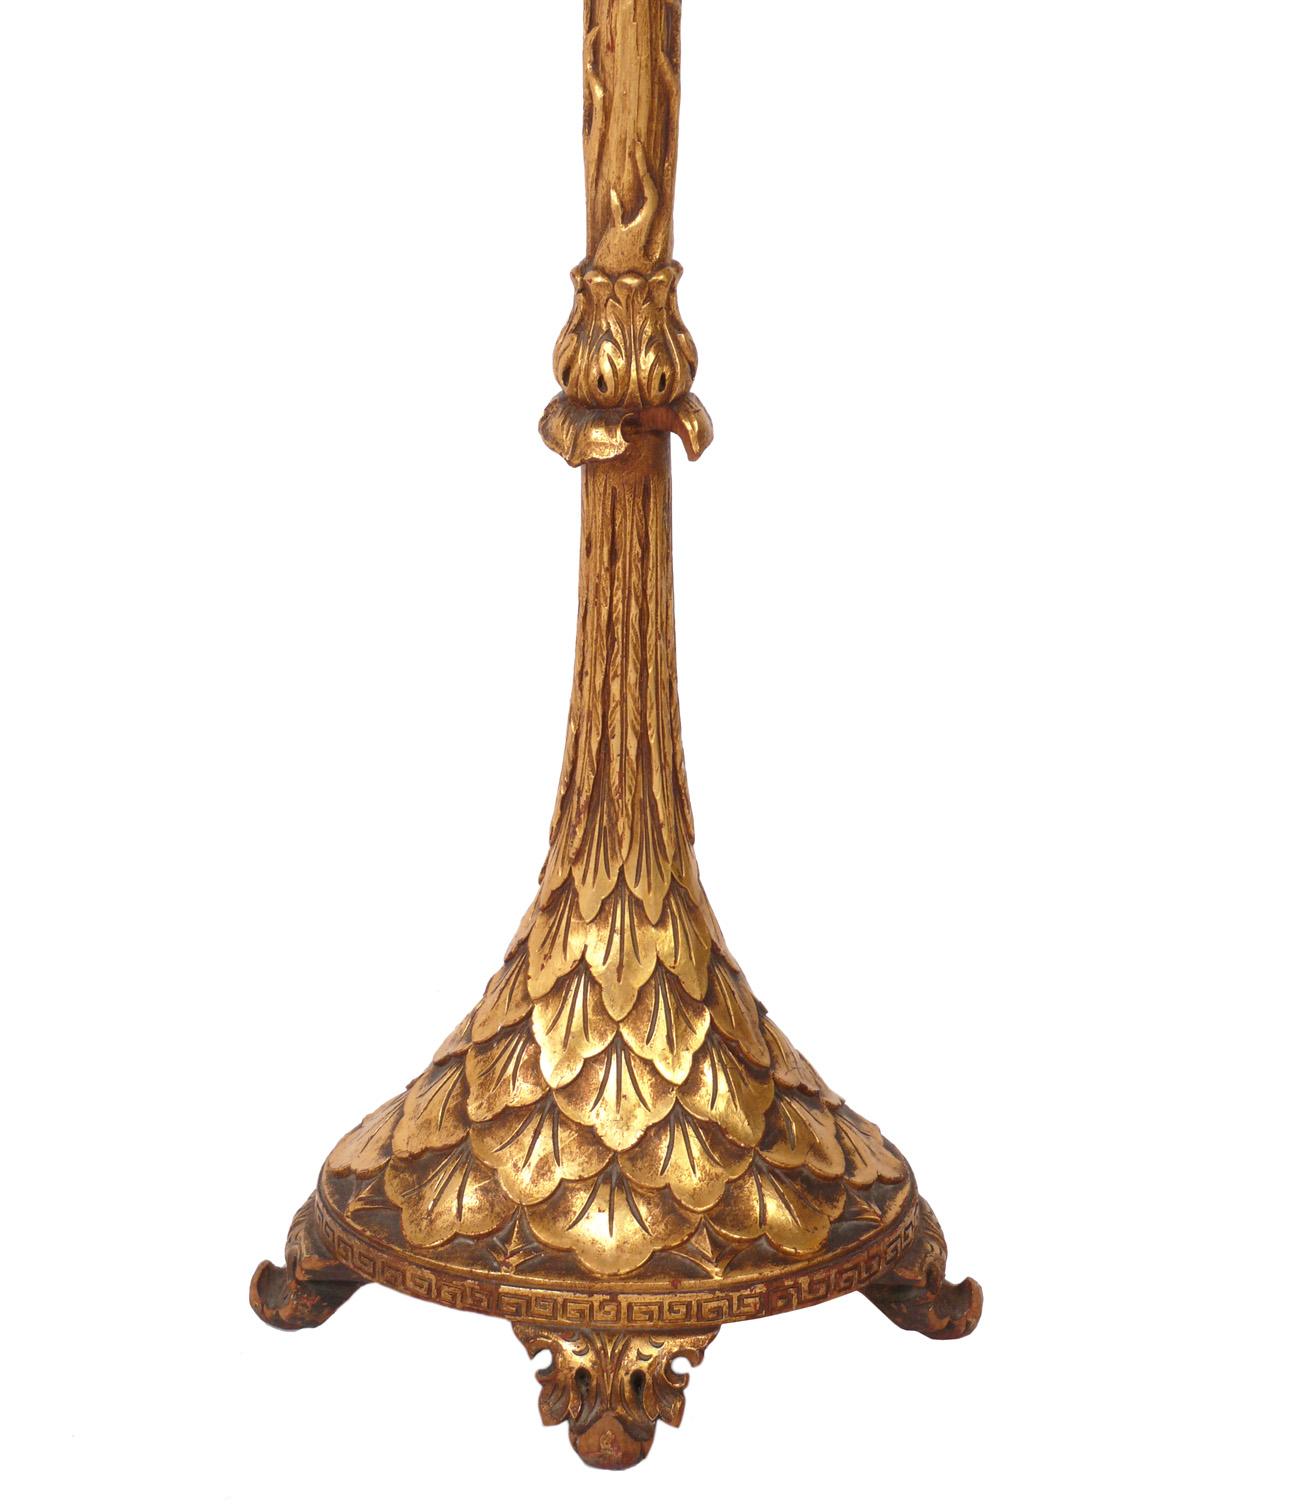 Glamorous gilt wood floor lamp, American, circa 1930s. Retains wonderful original patina to gilt wood finish. It has been rewired and is ready to use. The price noted includes the shade.